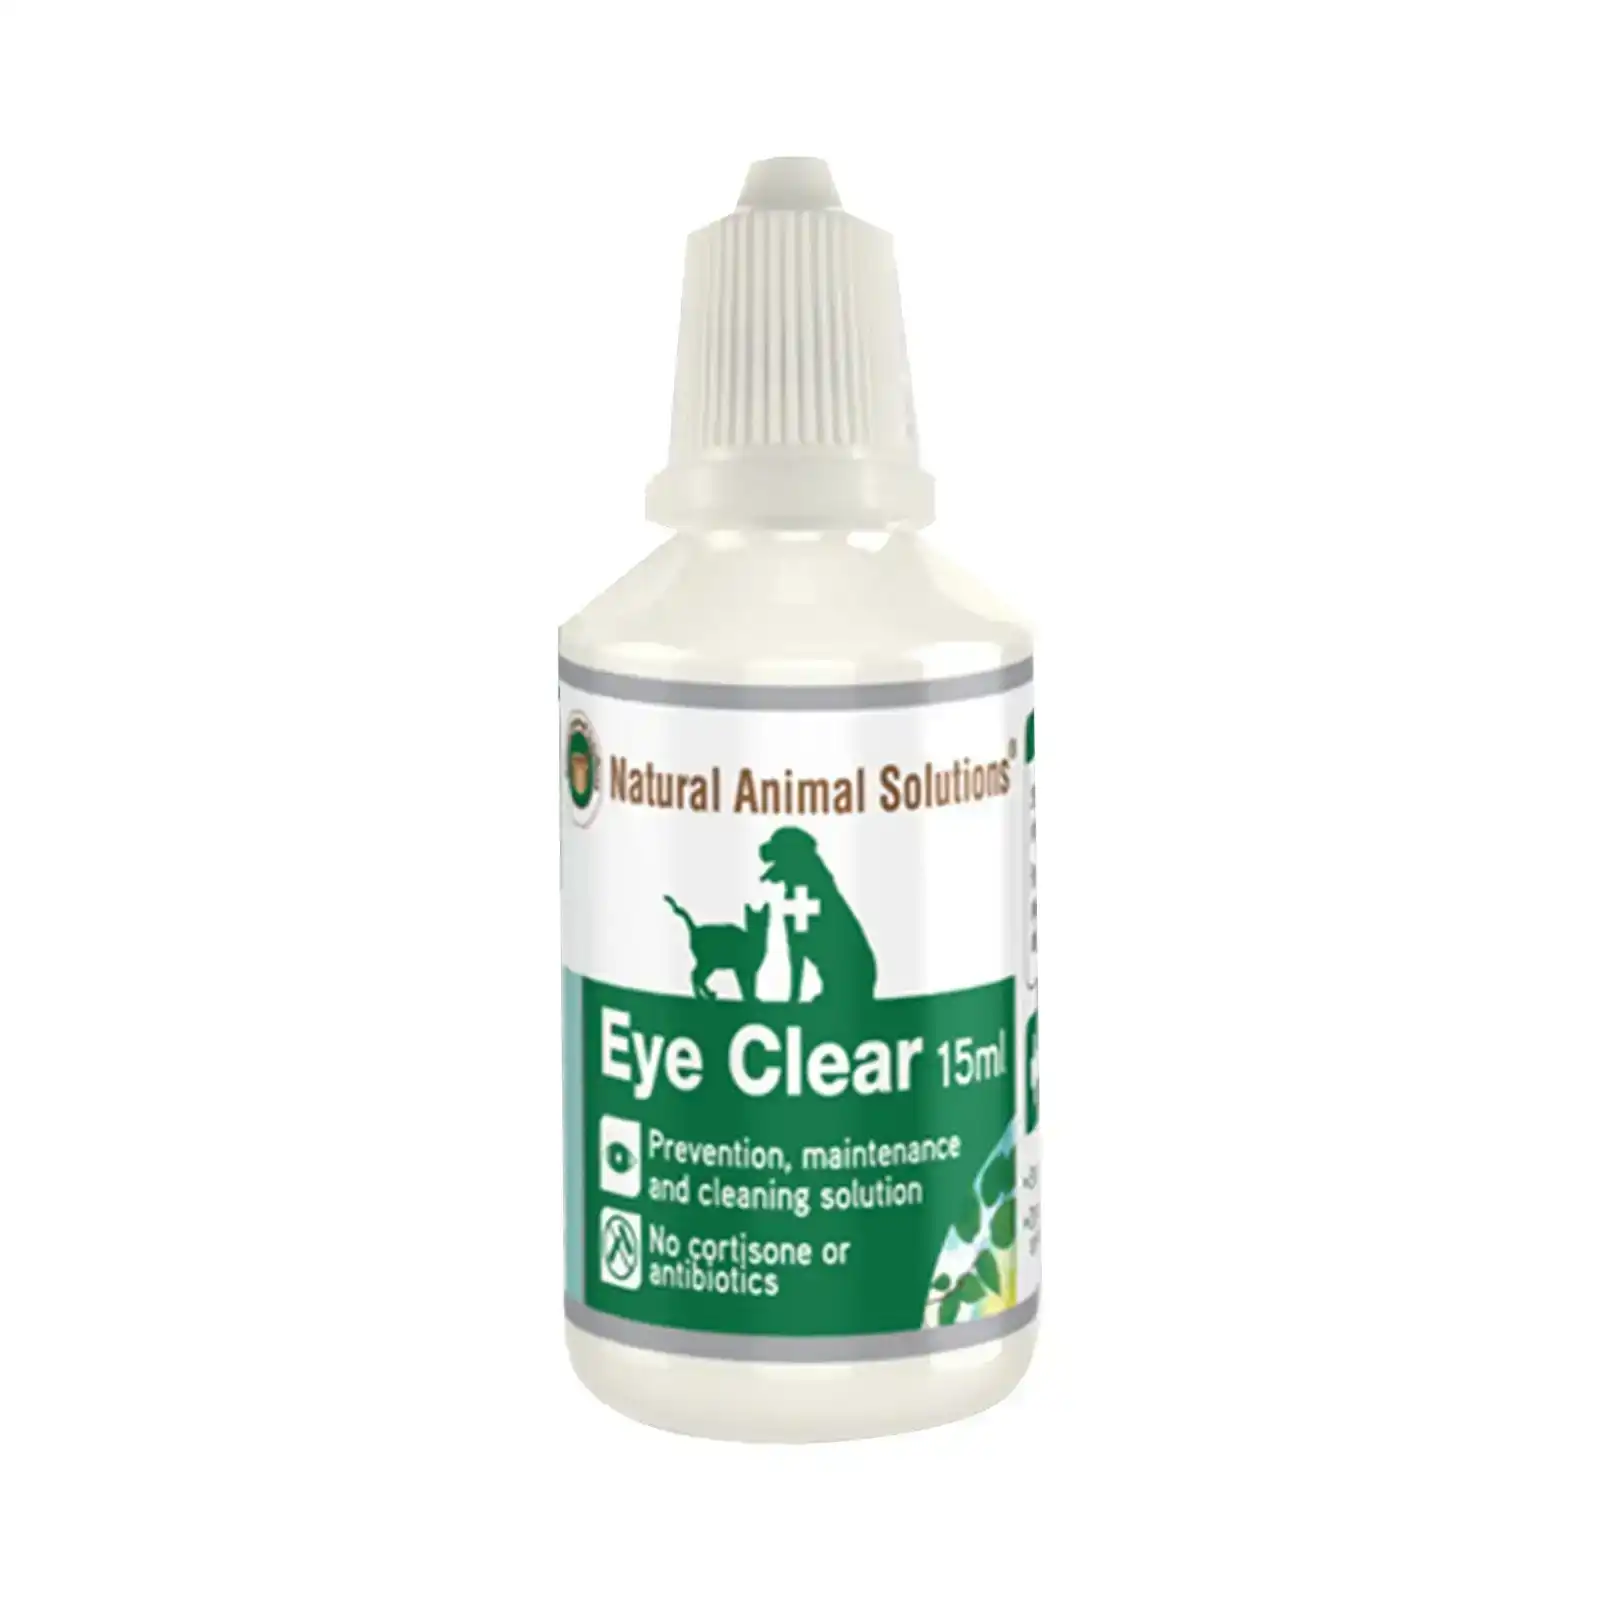 Natural Animal Solutions Eye Clear 15 mL